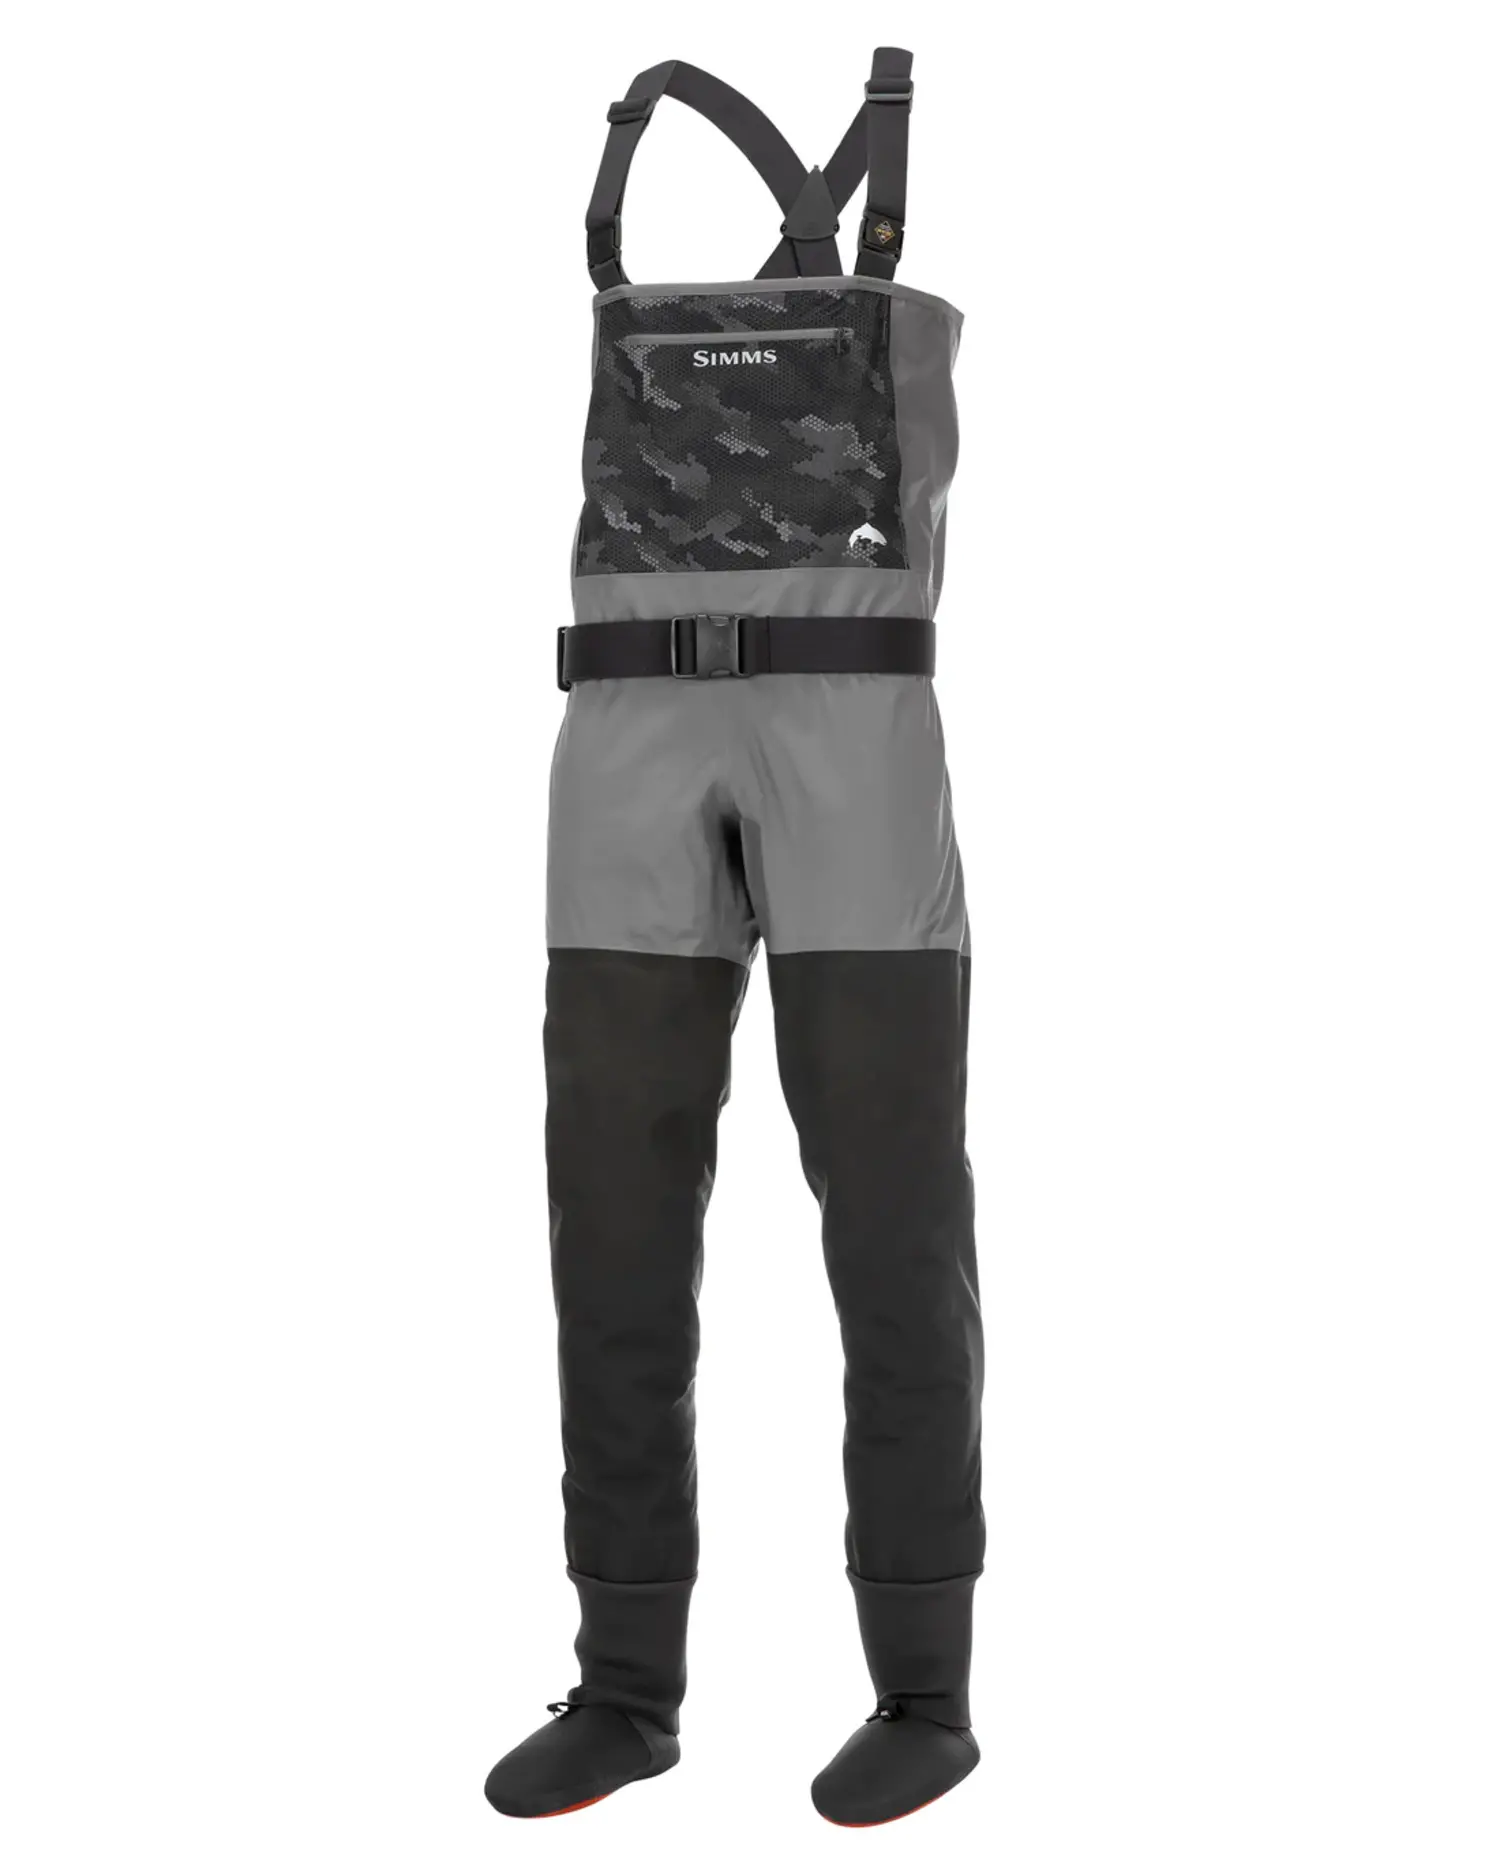 Simms M's Guide Classic Stockingfoot Waders